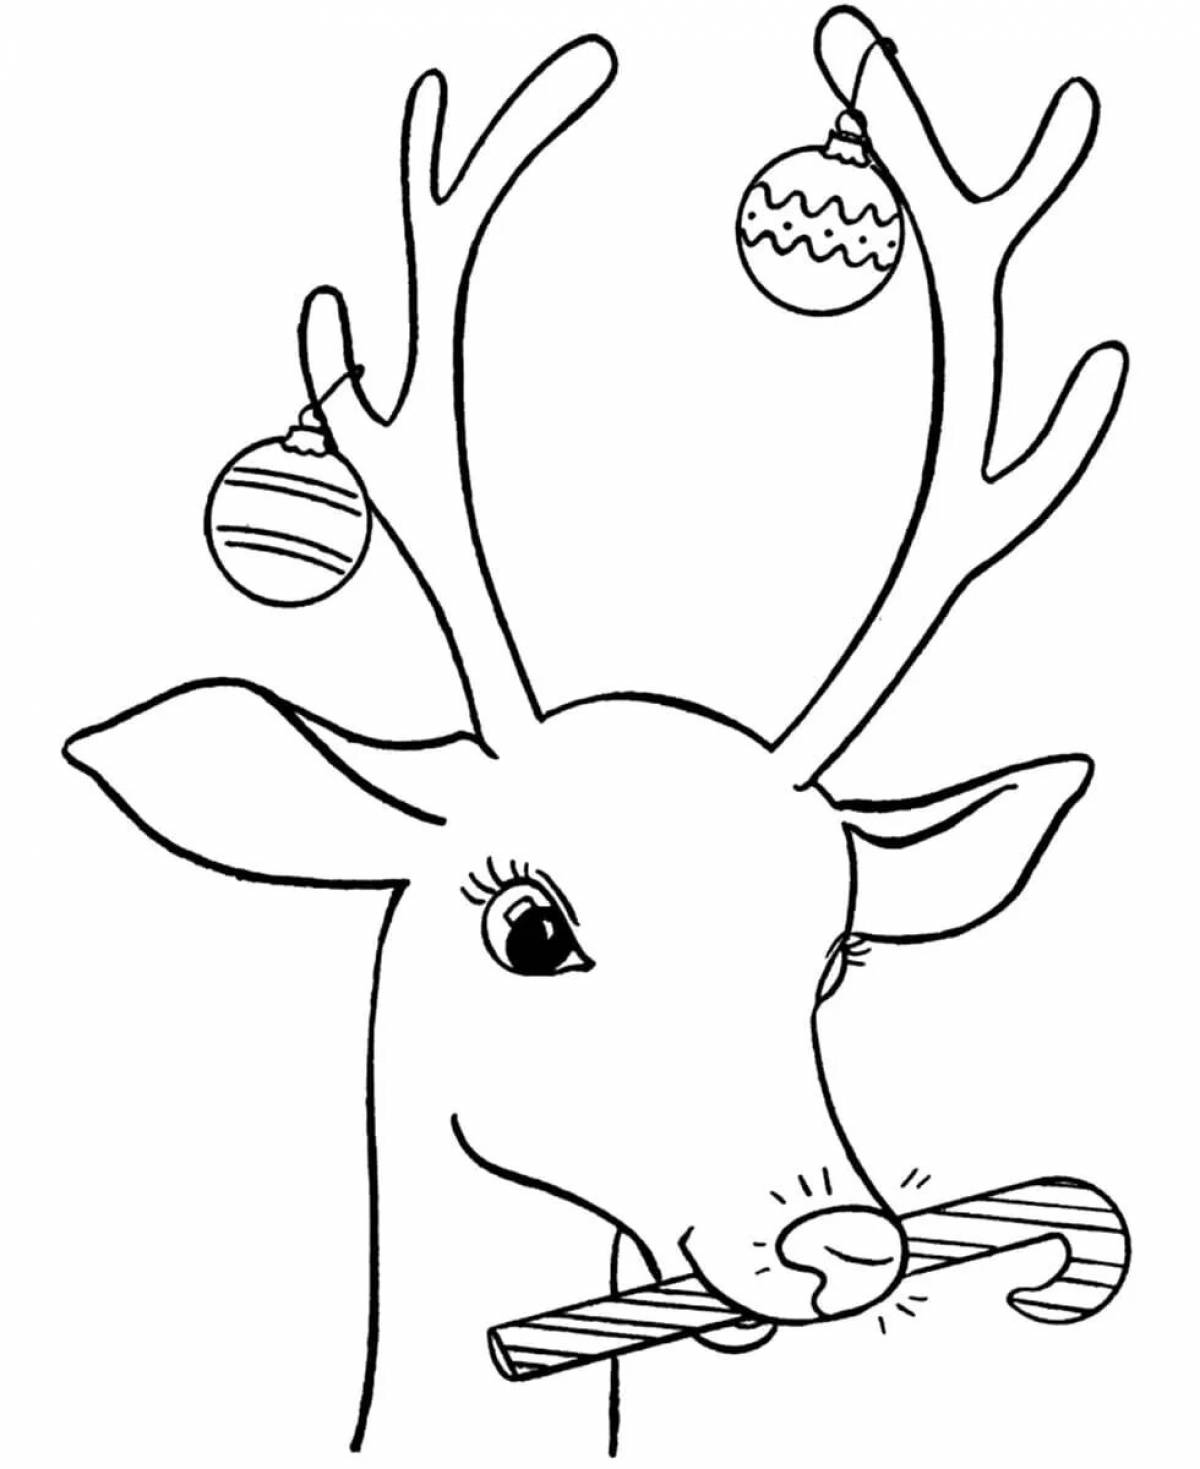 Deer live coloring for children 6-7 years old